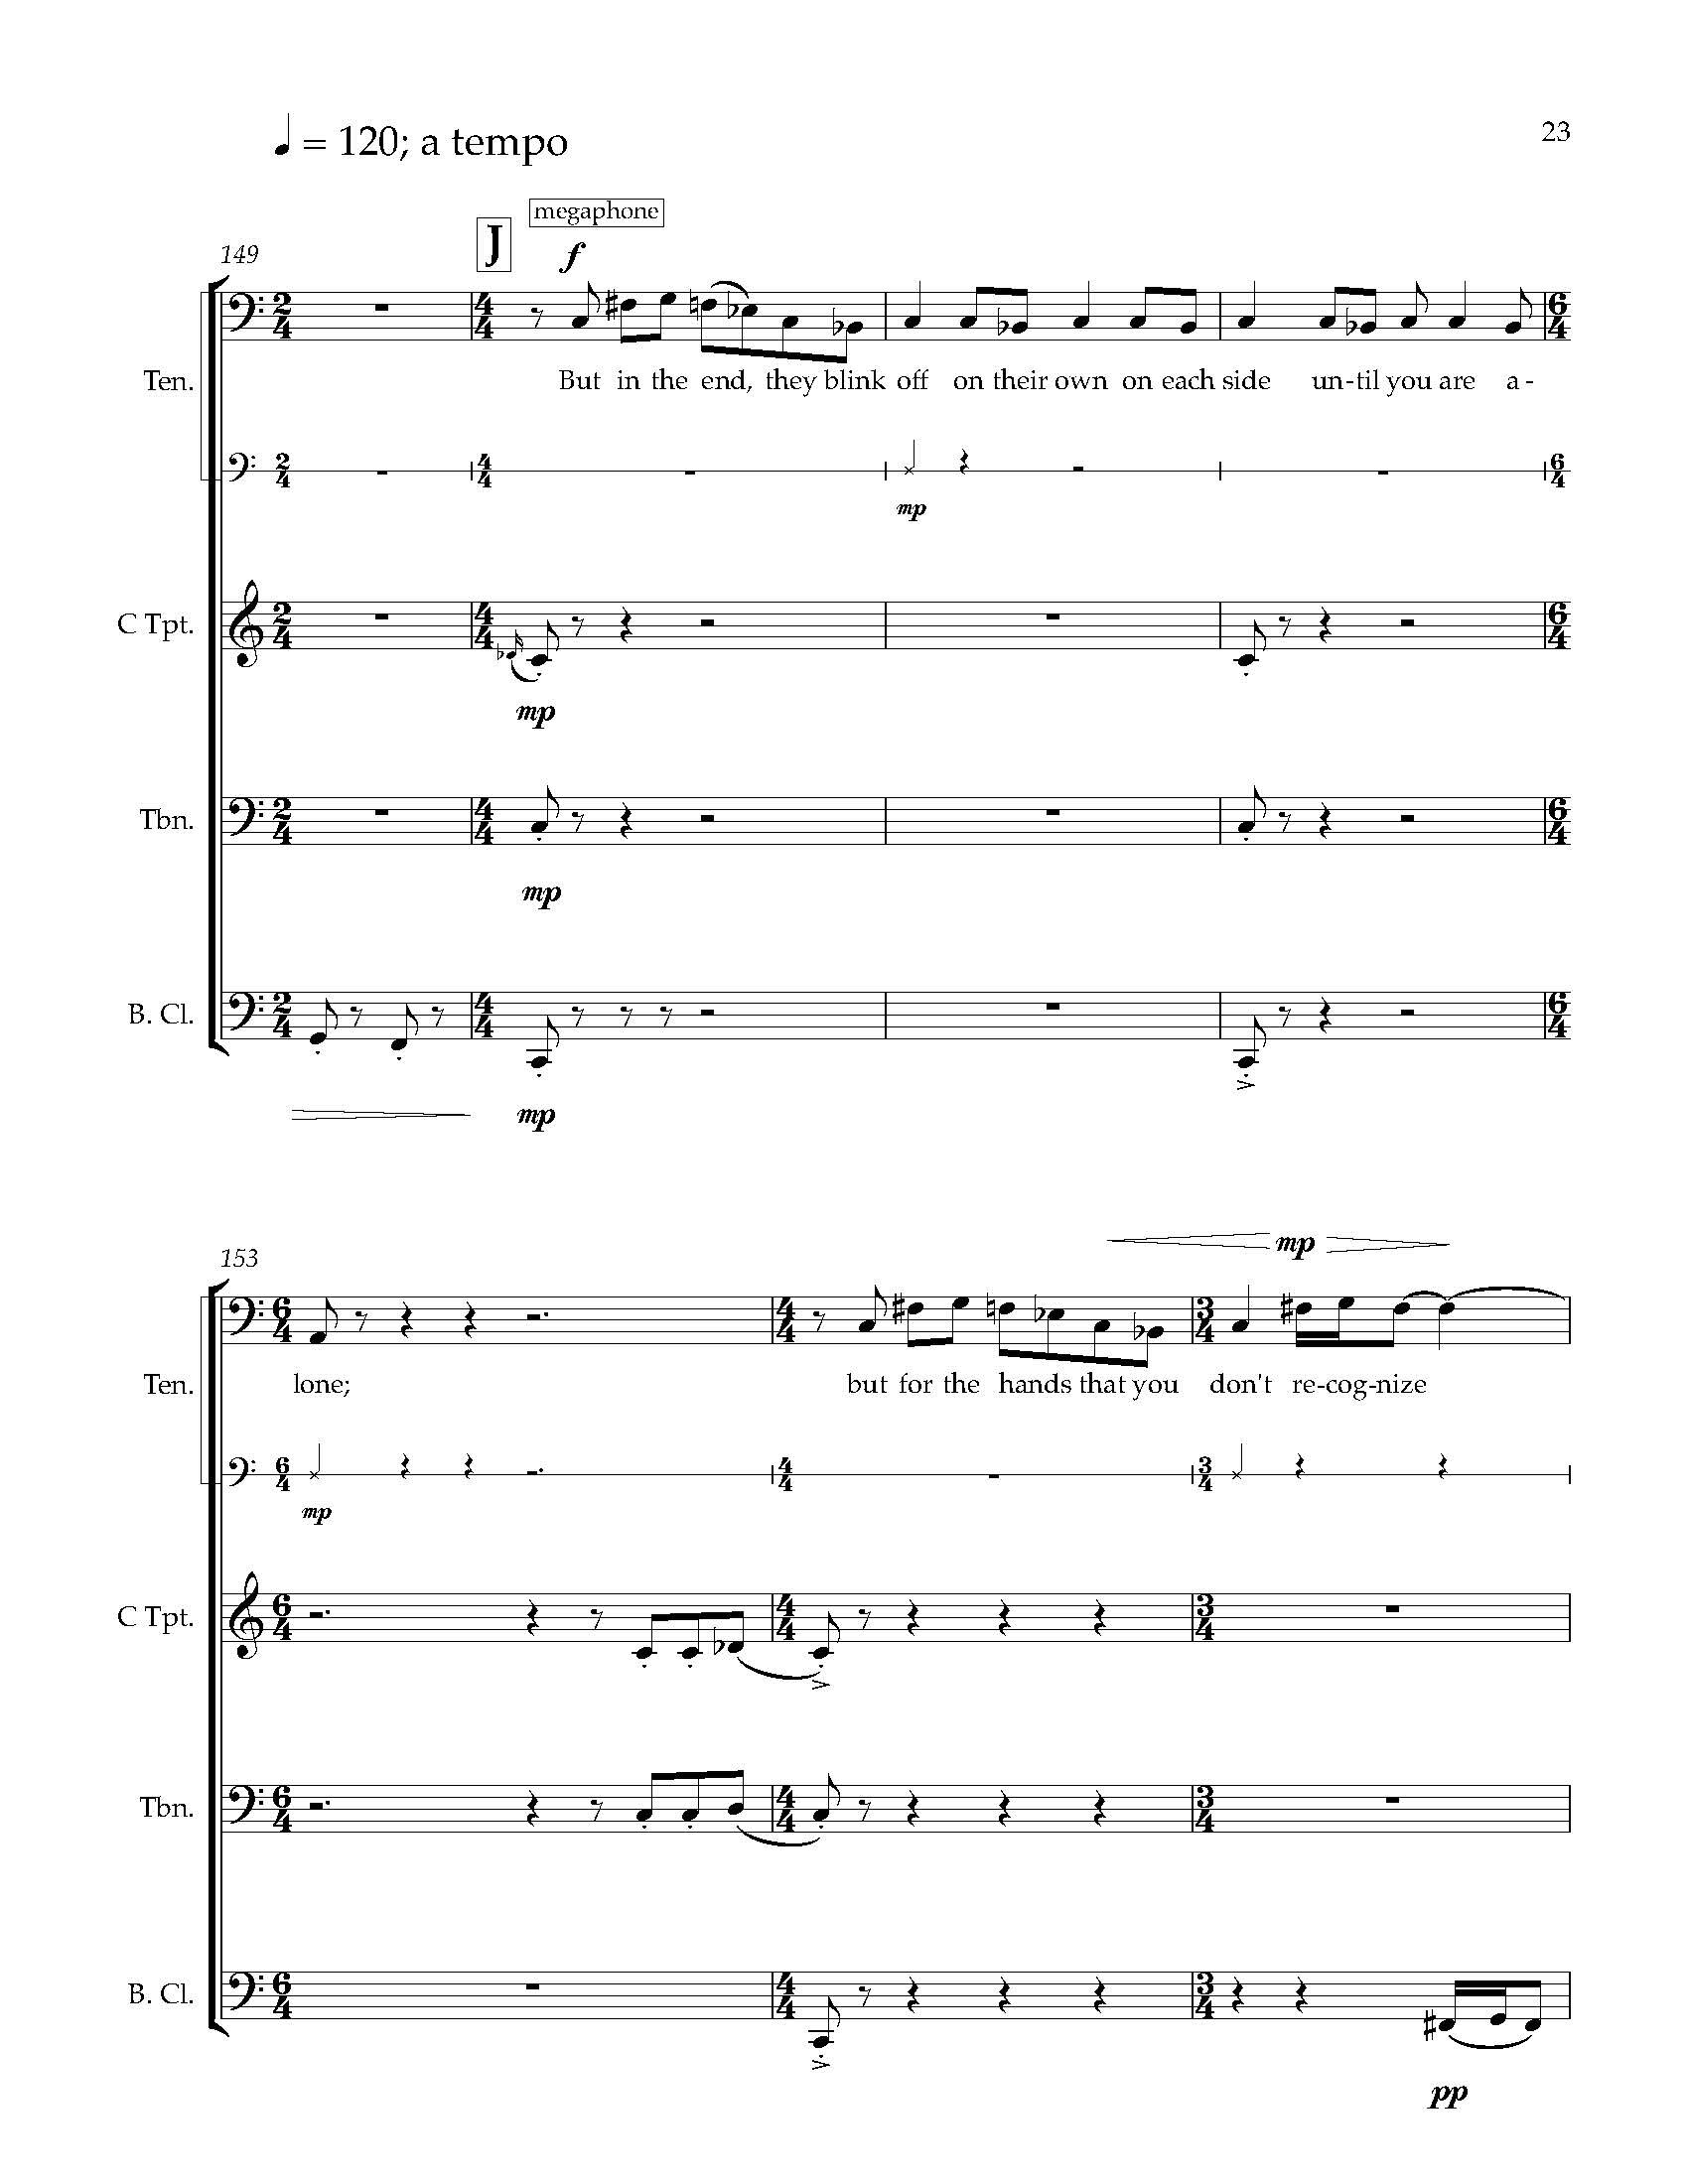 Many Worlds [1] - Complete Score_Page_32.jpg